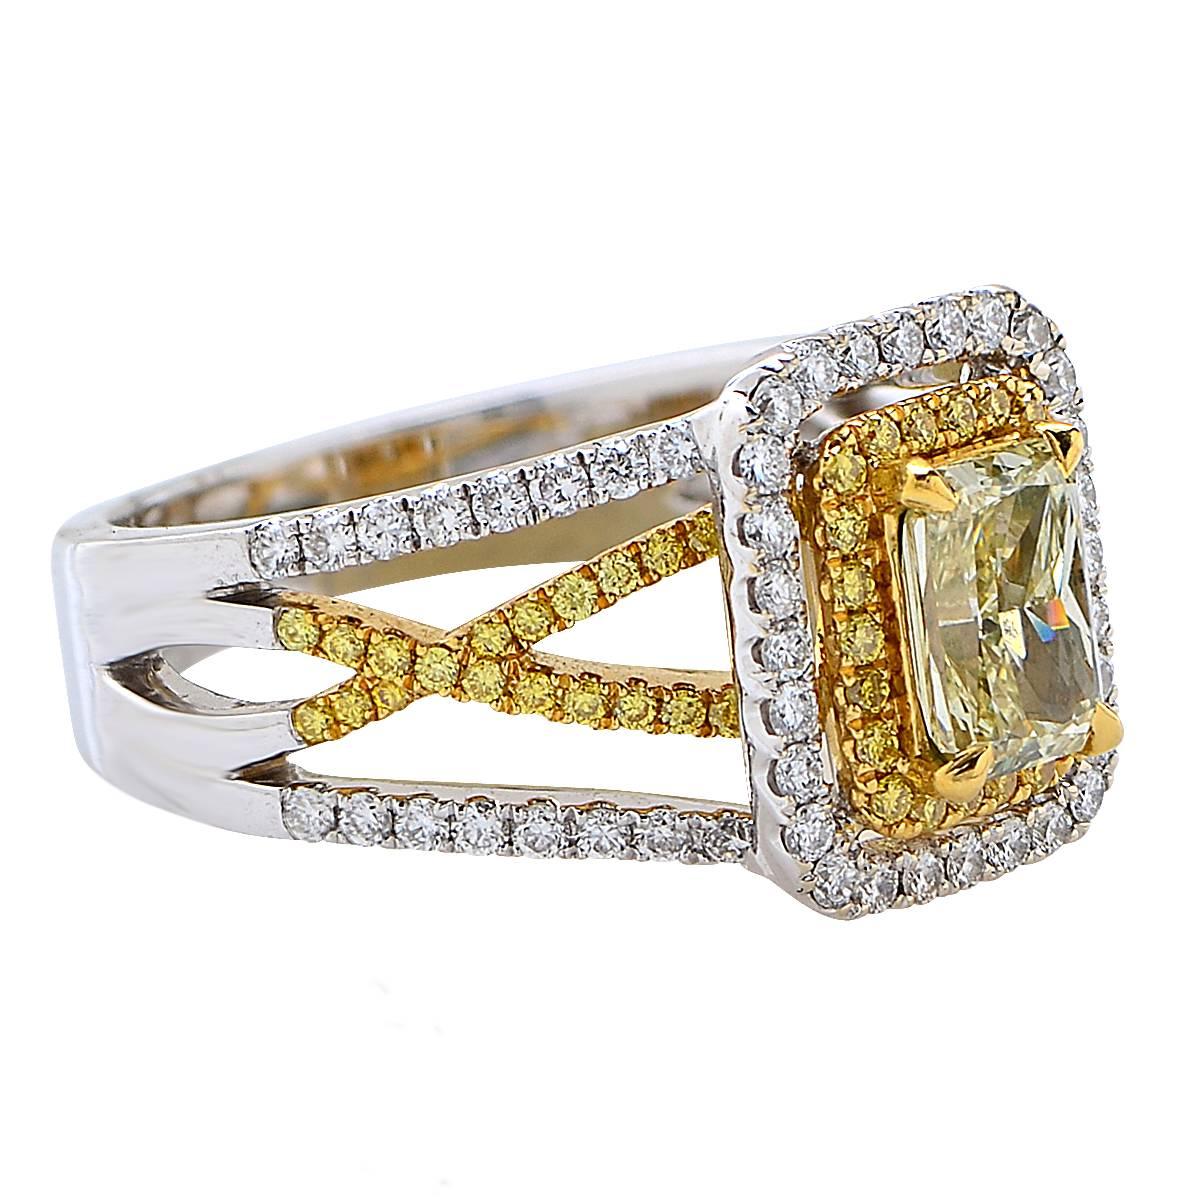 Stunning ring crafted in 18 Karat white and yellow gold, showcasing a GIA Certified radiant cut Fancy Yellow diamond weighing 1.11 carats, SI1 clarity, surrounded by 132 round brilliant cut Fancy Intense Yellow diamonds and white, G Color diamonds